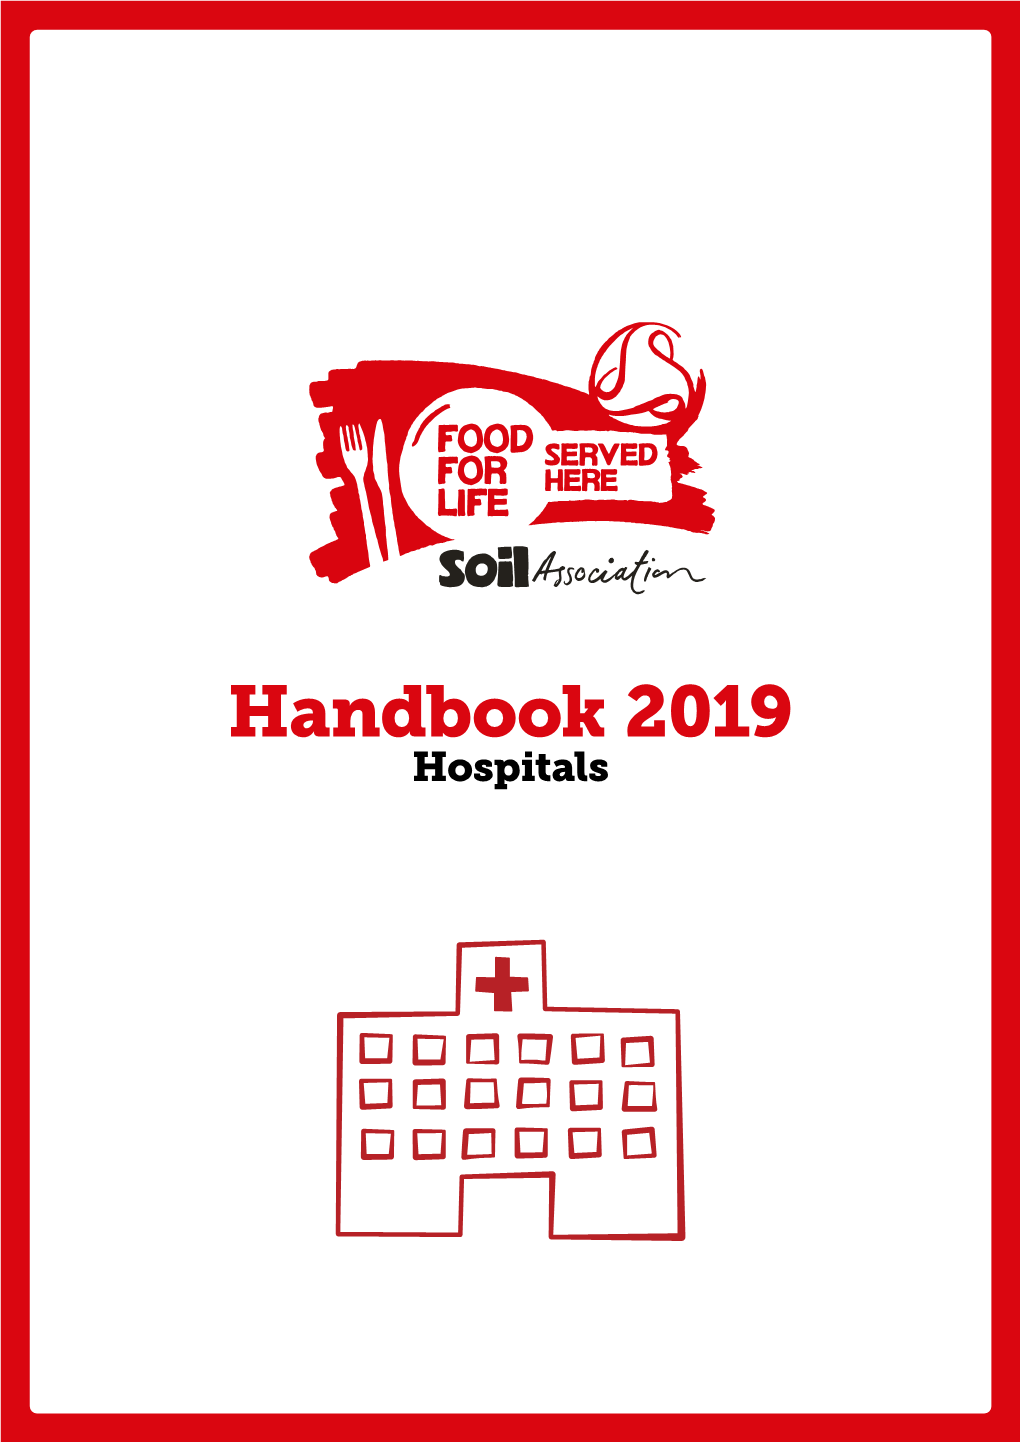 Food for Life Served Here Handbook for Hospitals